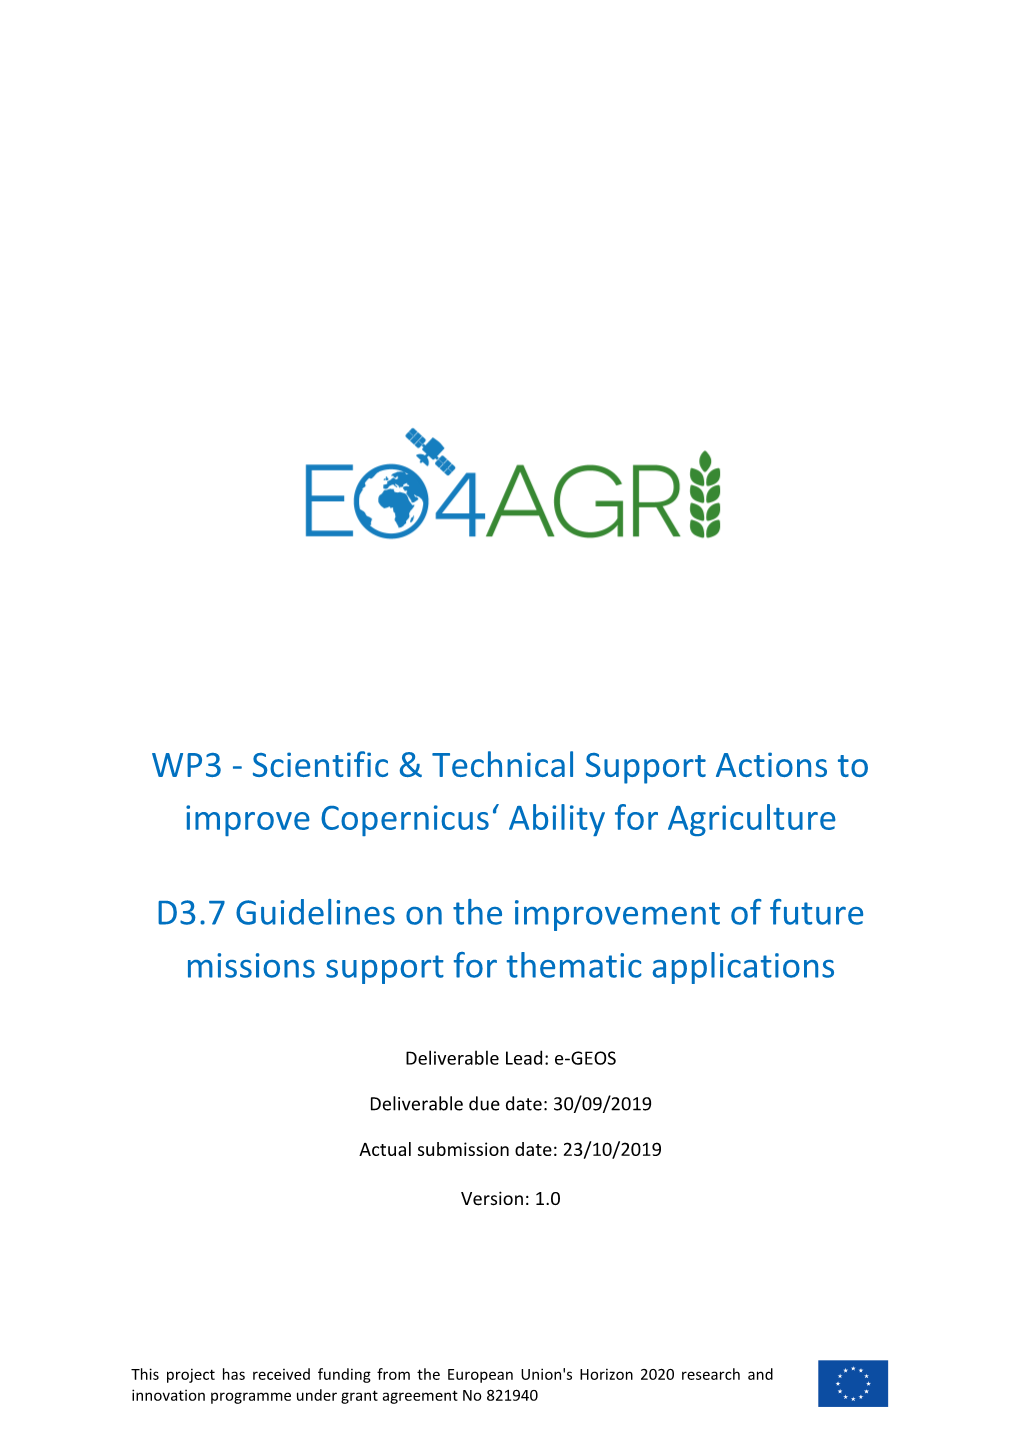 D3.7 Guidelines on the Improvement of Future Missions Support for Thematic Applications